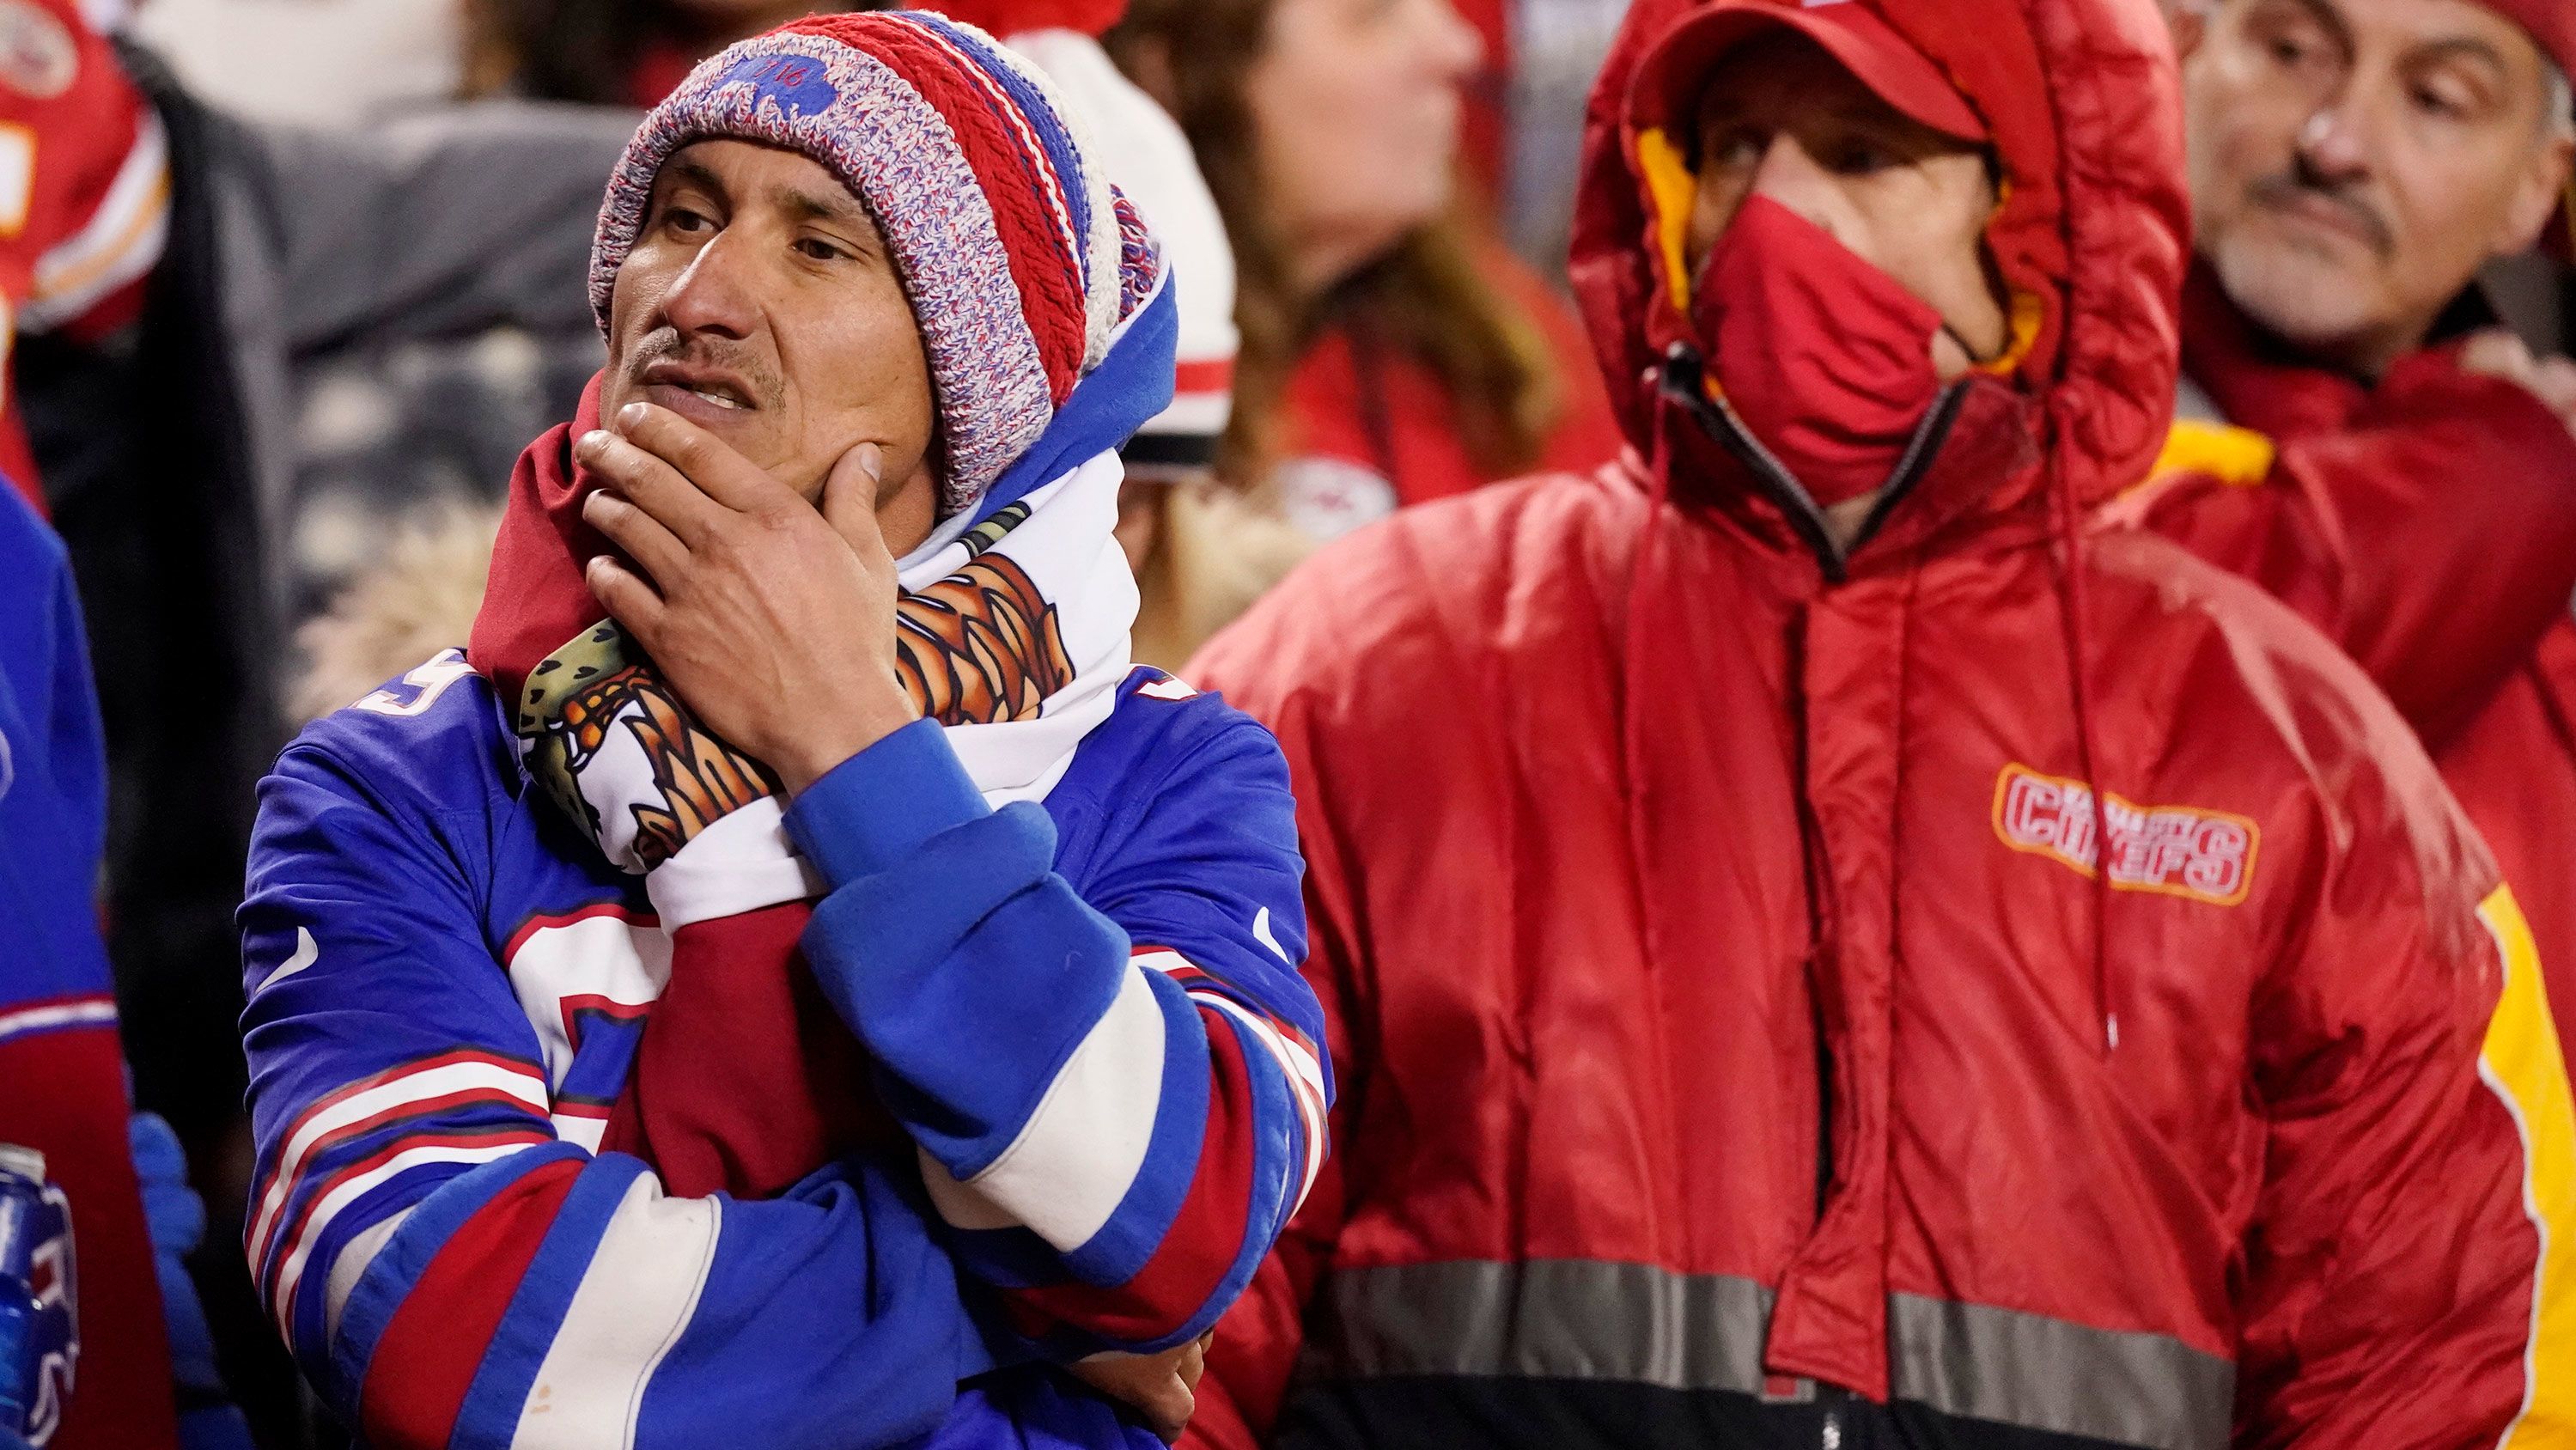 Bills fans might suffer a lot of heartbreak, but they remain ever loyal to their team.